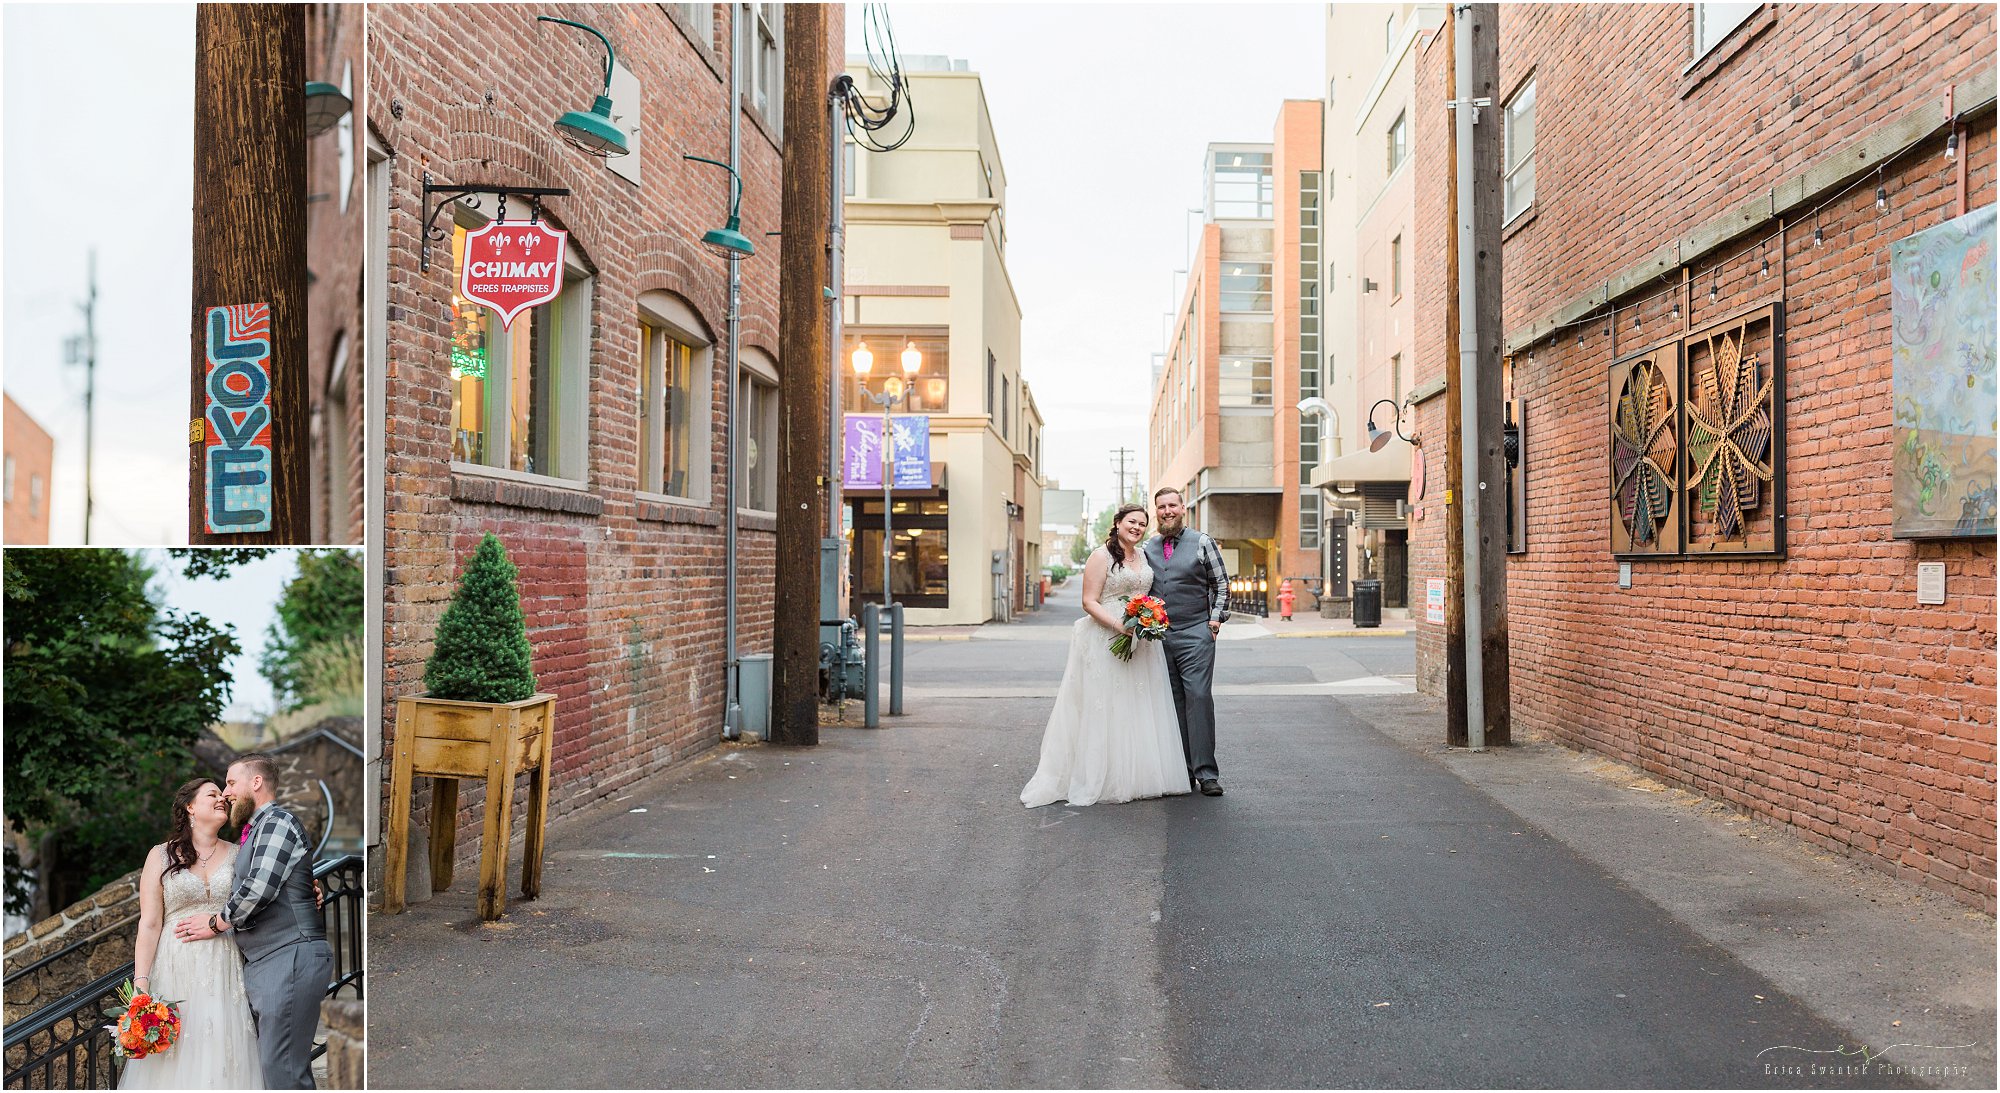 The art in Tin Pan Alley provides a unique urban backdrop for this wedding couple's portraits taken by Bend wedding photographer Erica Swantek Photography.